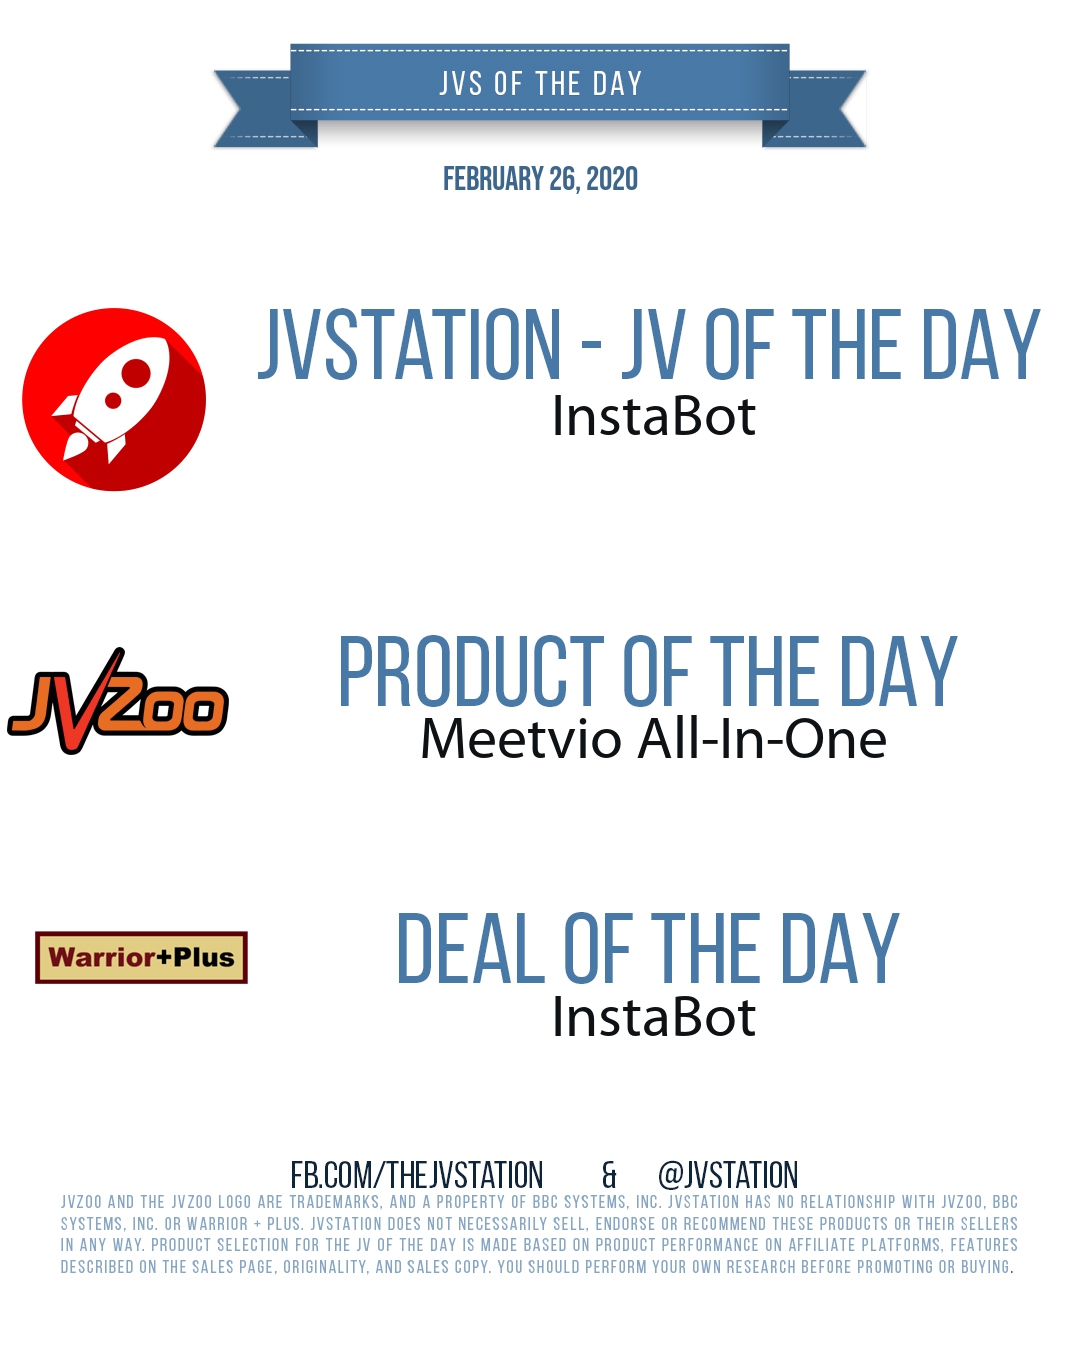 JVs of the day - February 26, 2020